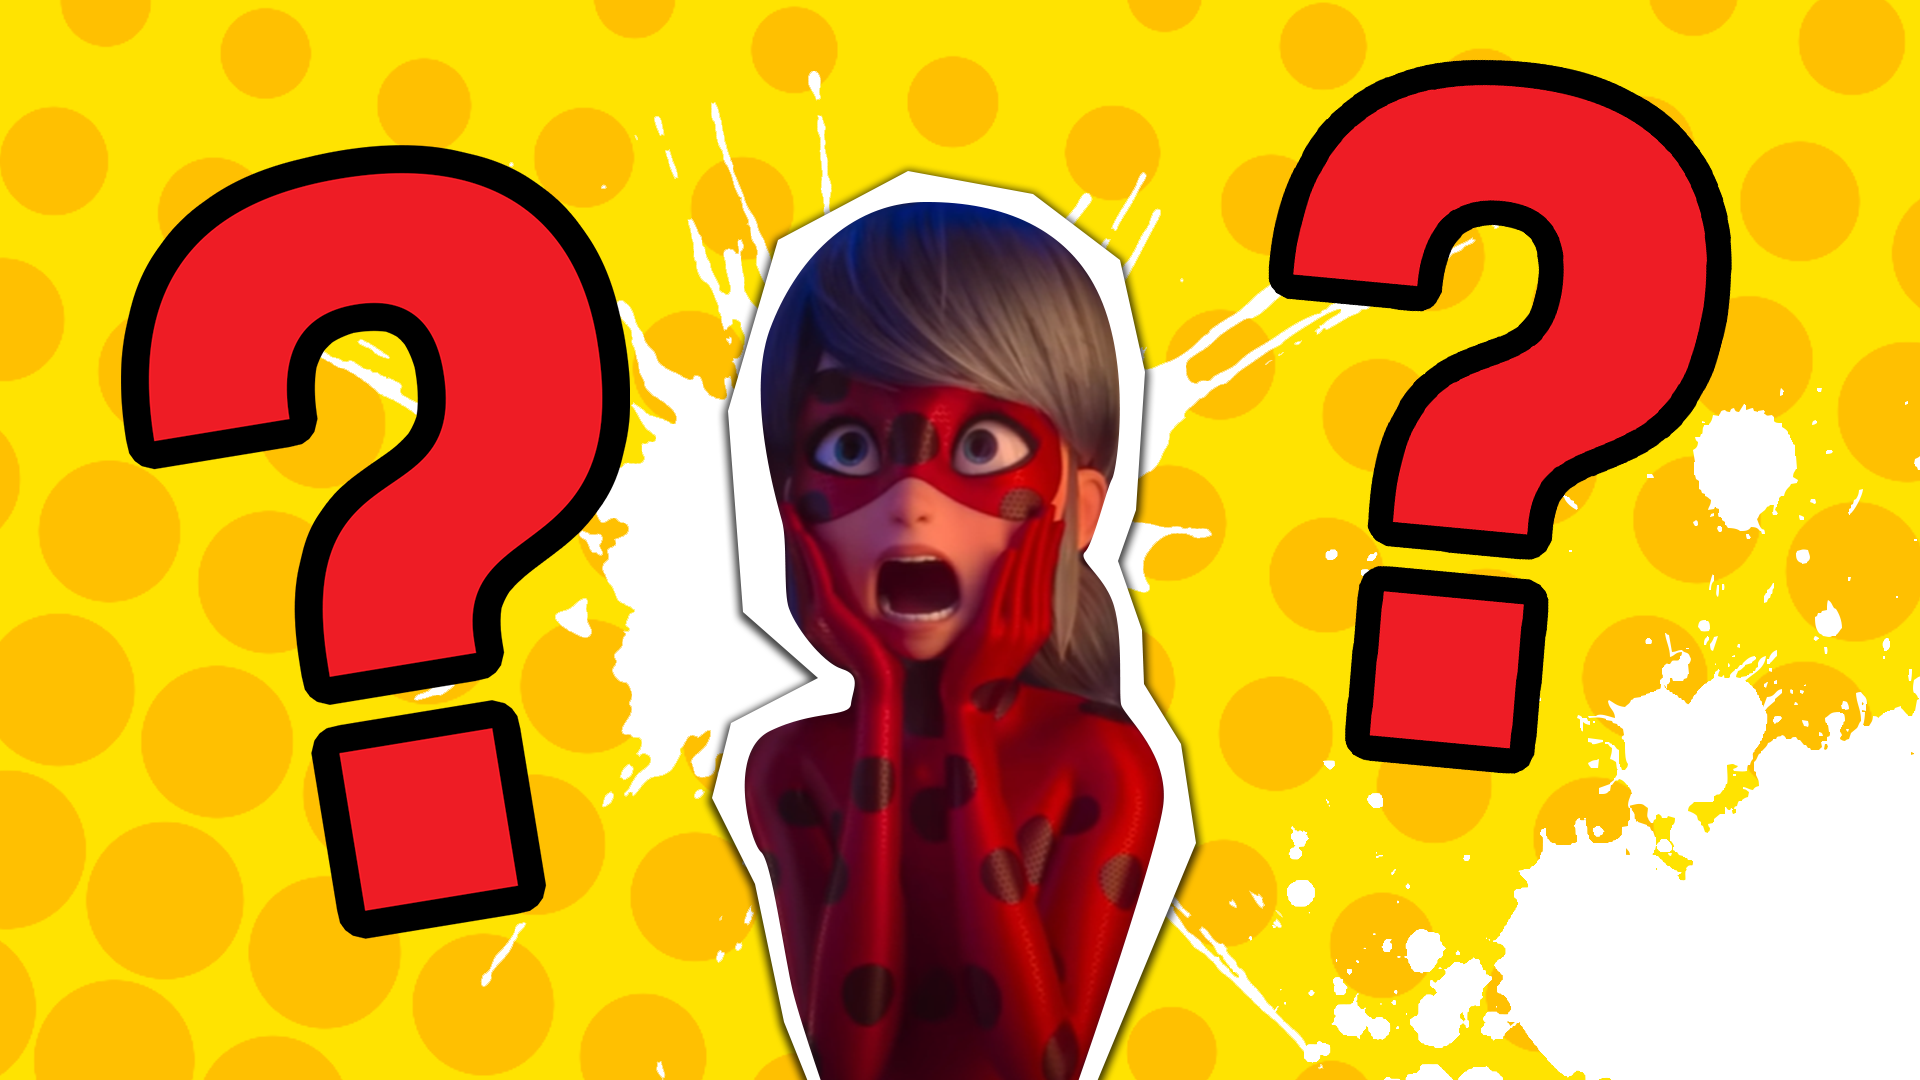 Miraculous Quiz: Which Kwami Would You Be Given? - Animation - QuizRain